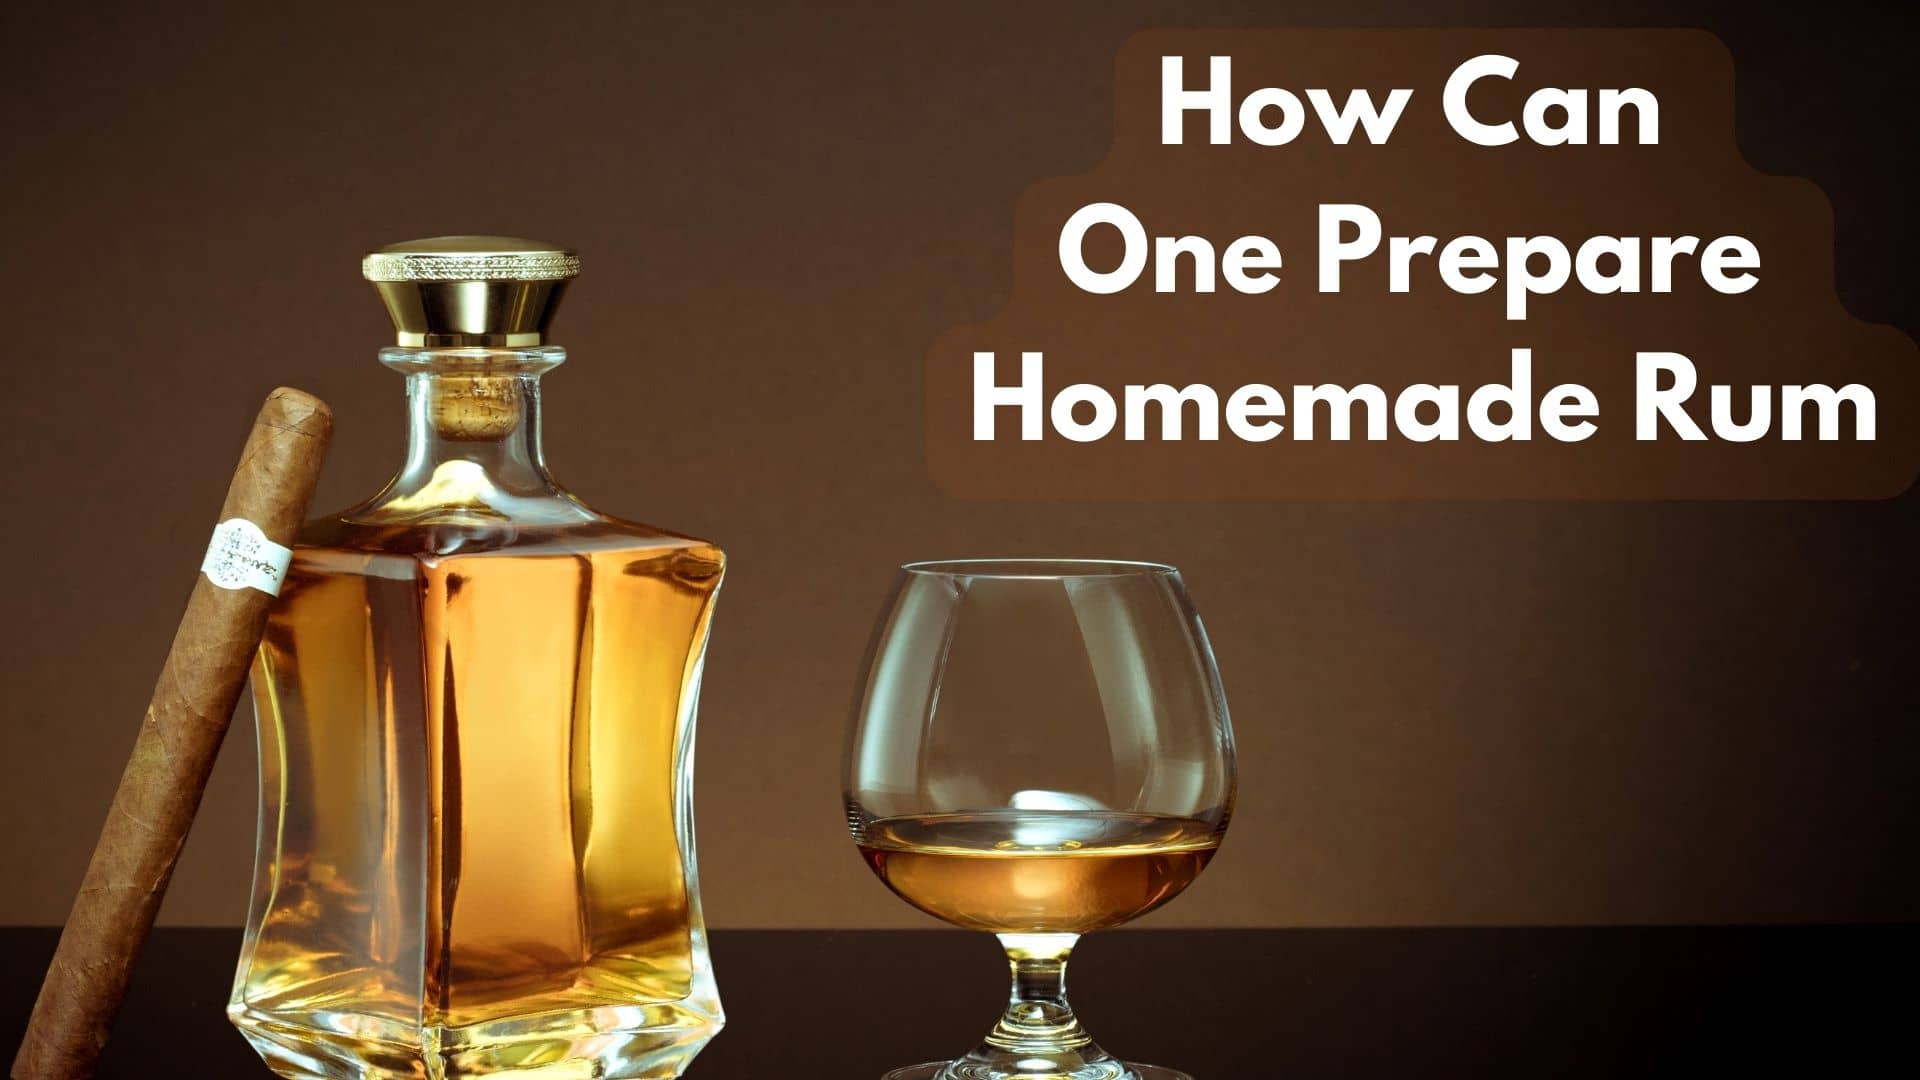 How Can One Prepare Homemade Rum?